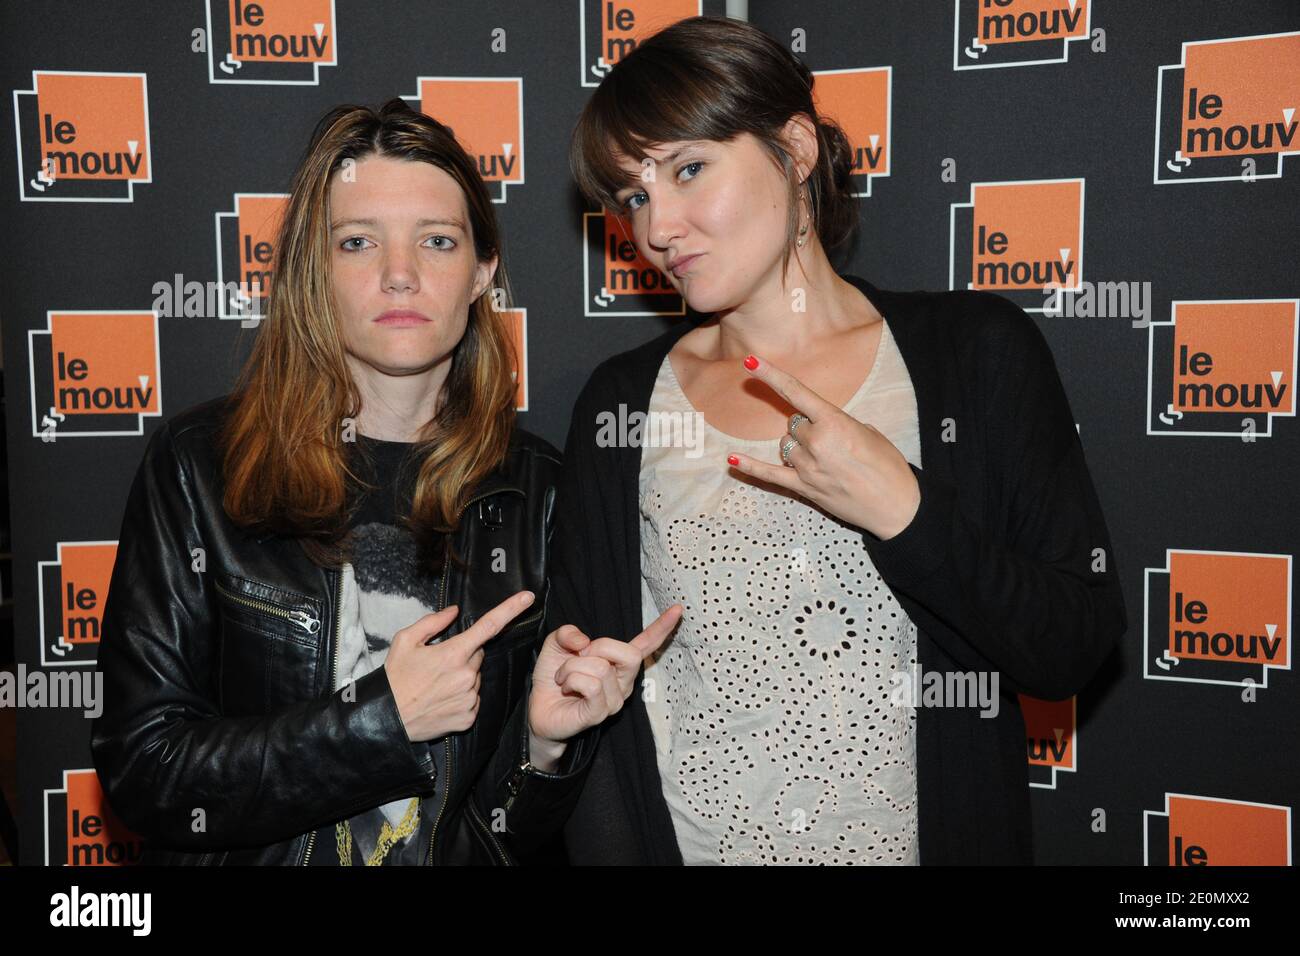 Charline Roux and Laura Leishman (Le Mouv') at the Radio France Press  Conference, held at La